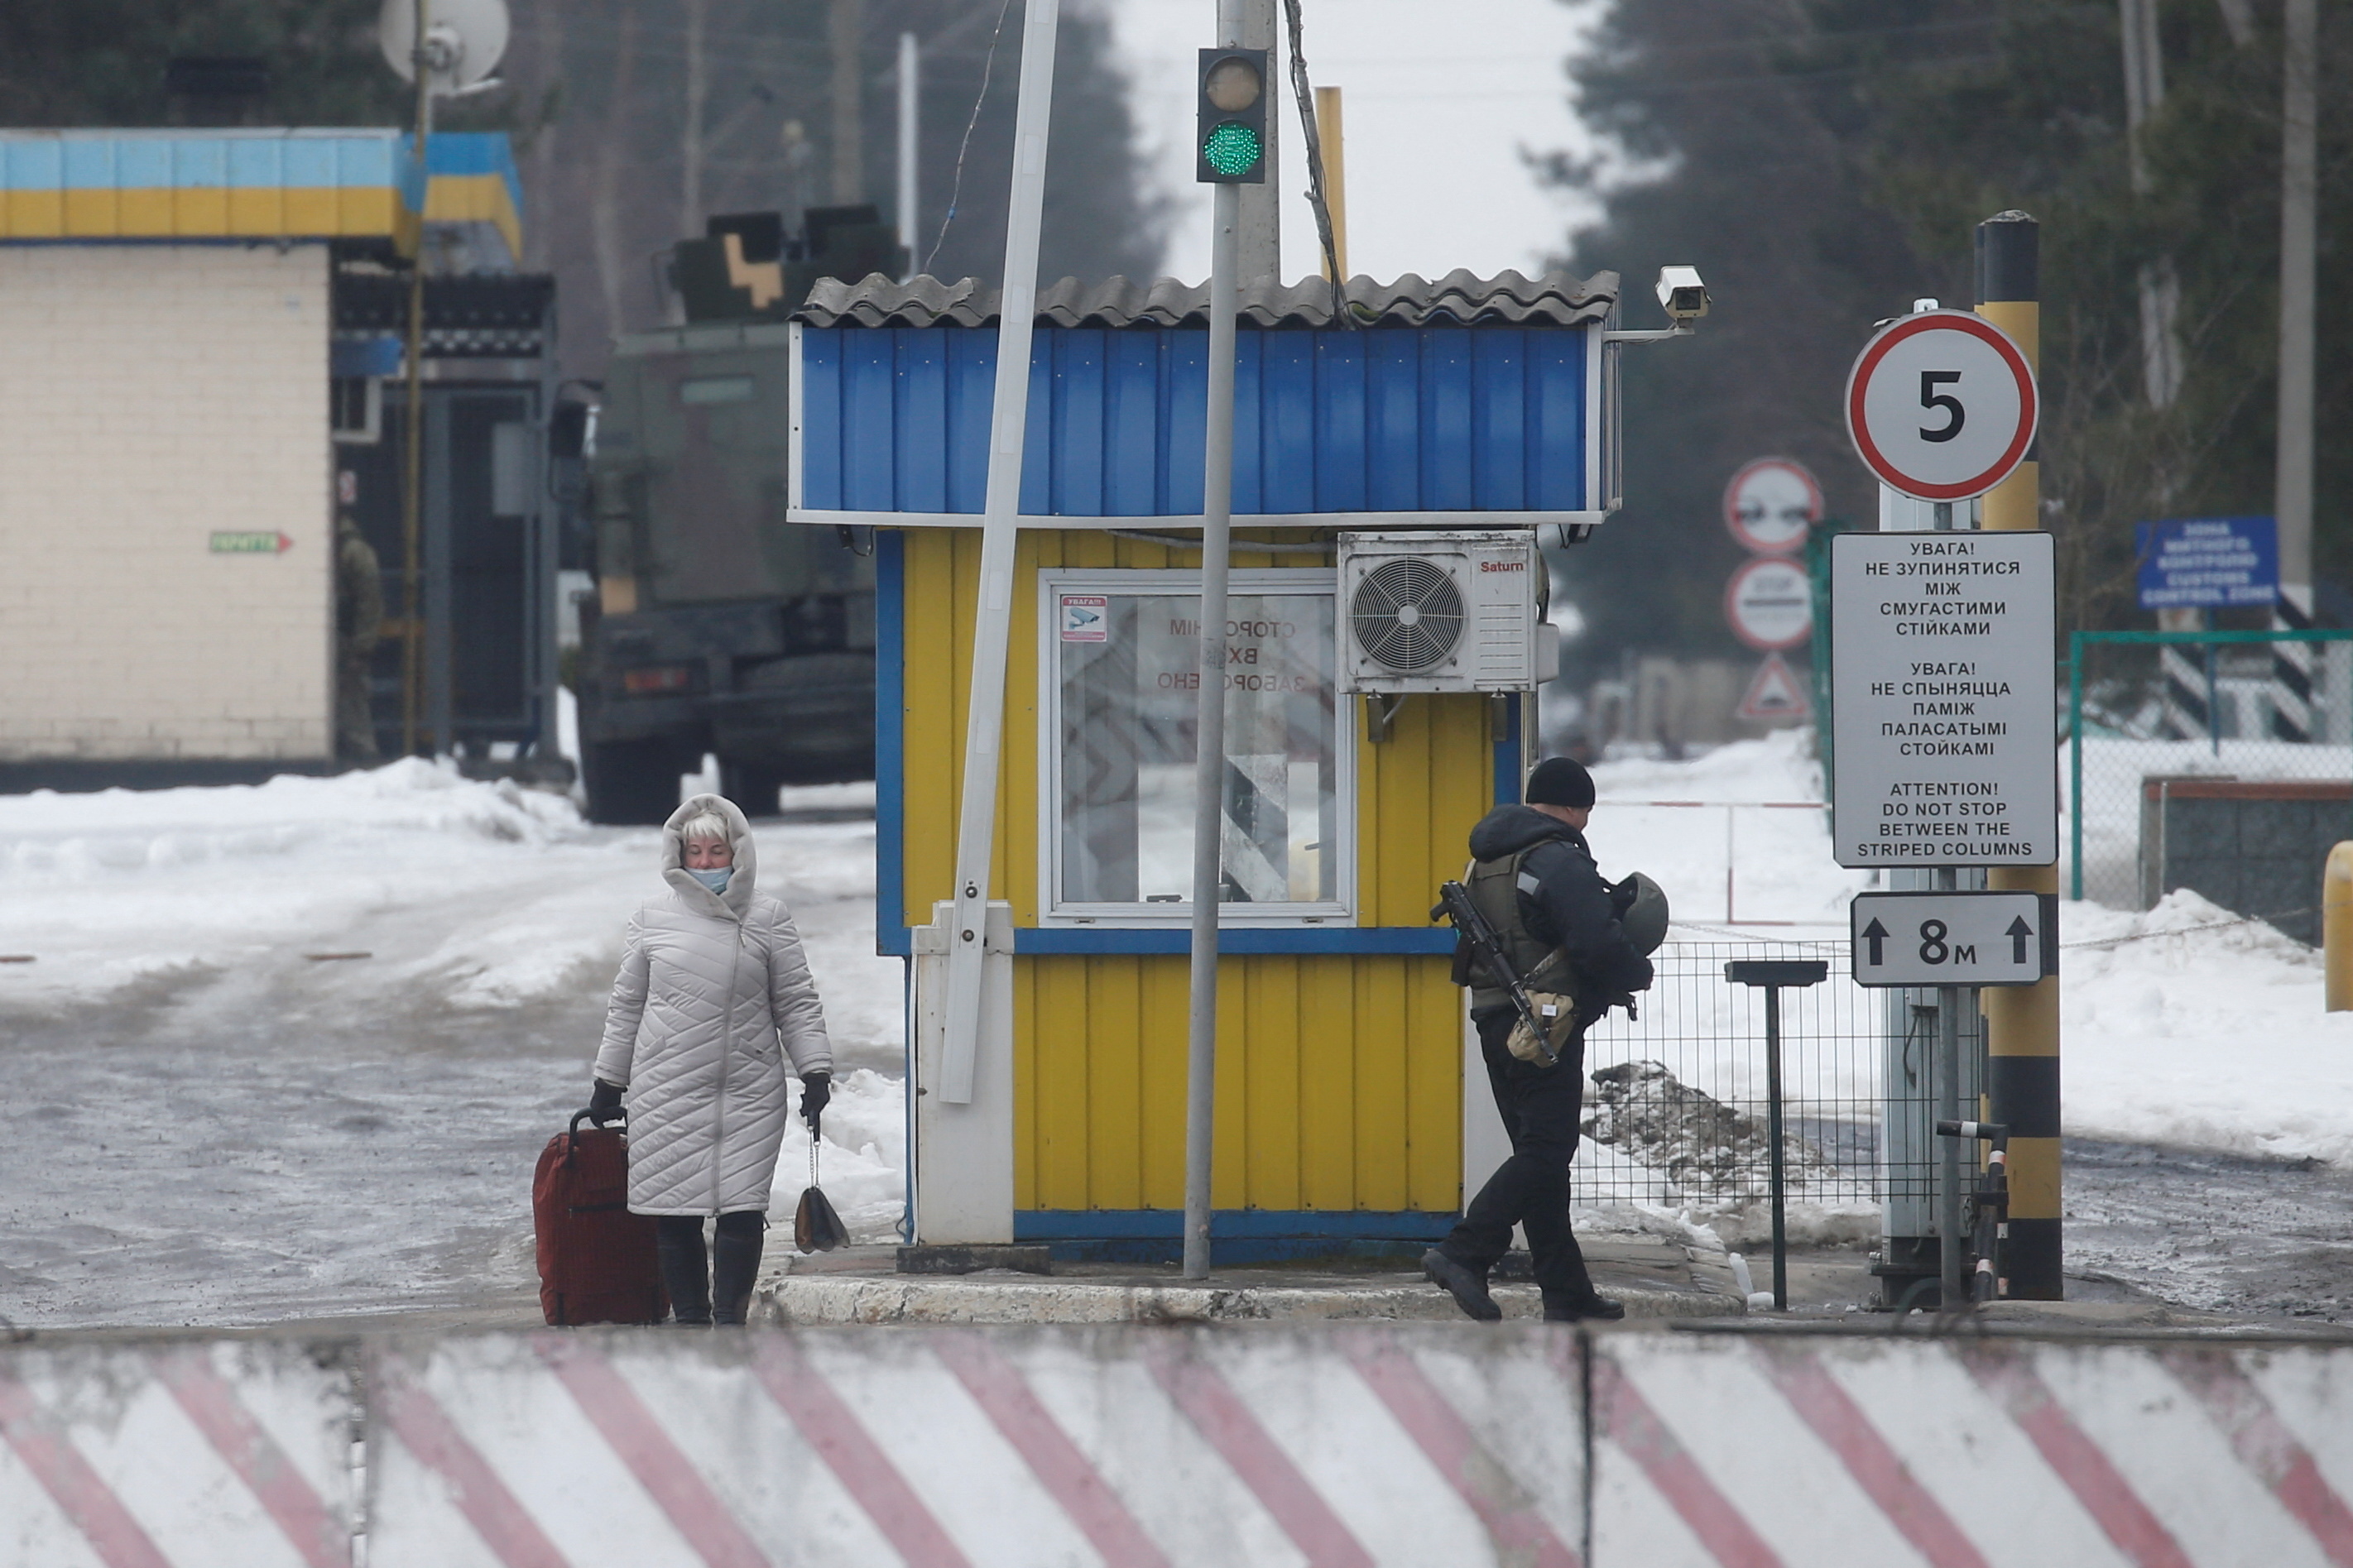 Ukrainian border guards keep watch on the border with Belarus and Russia in Chernihiv region